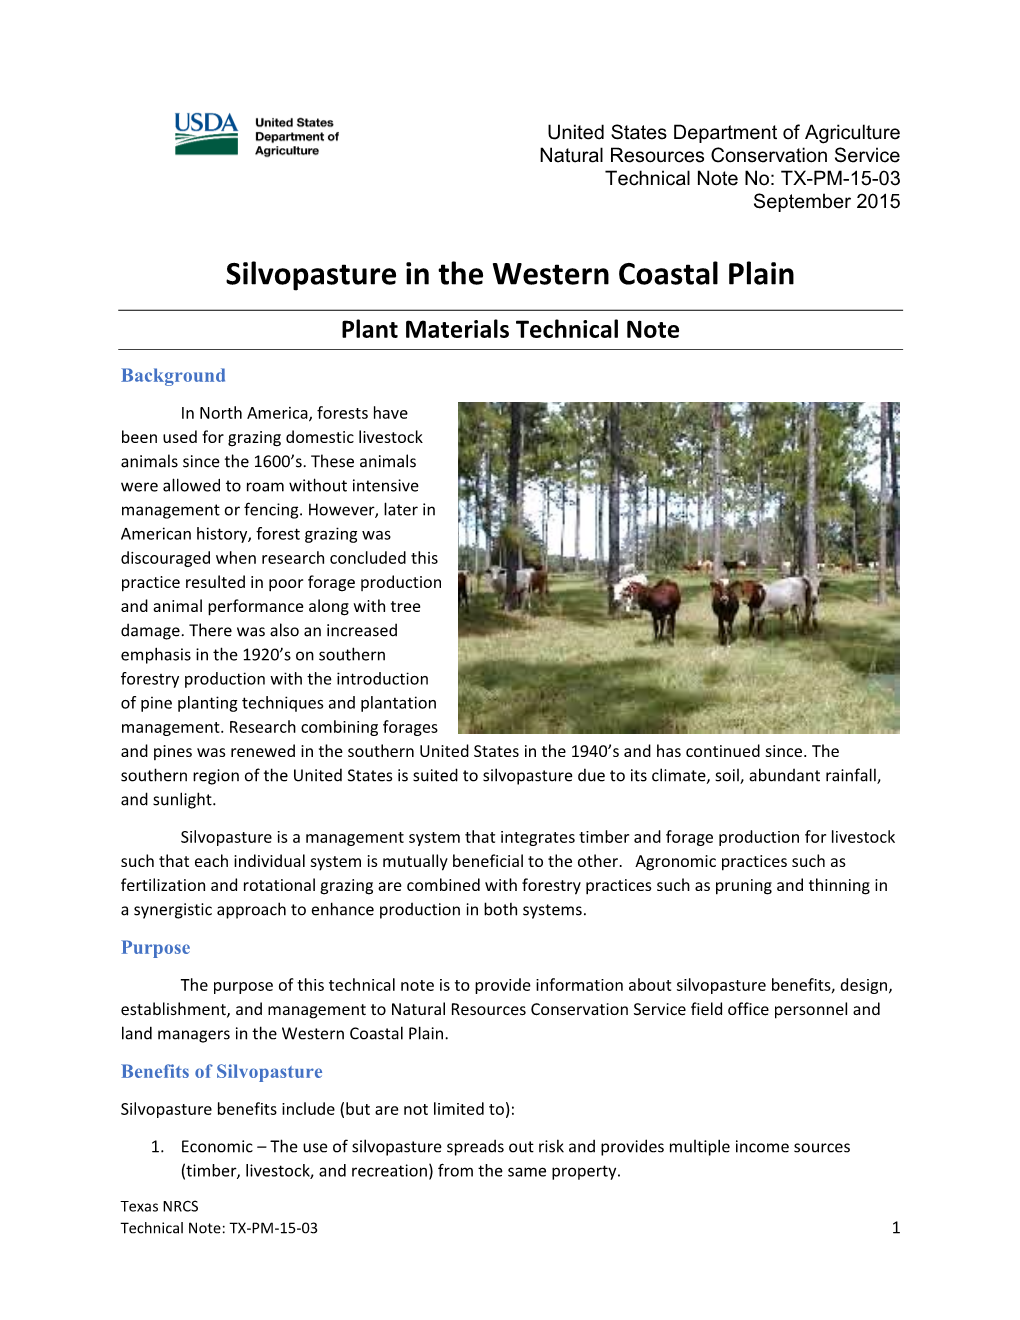 Silvopasture in the Western Coastal Plain Plant Materials Technical Note